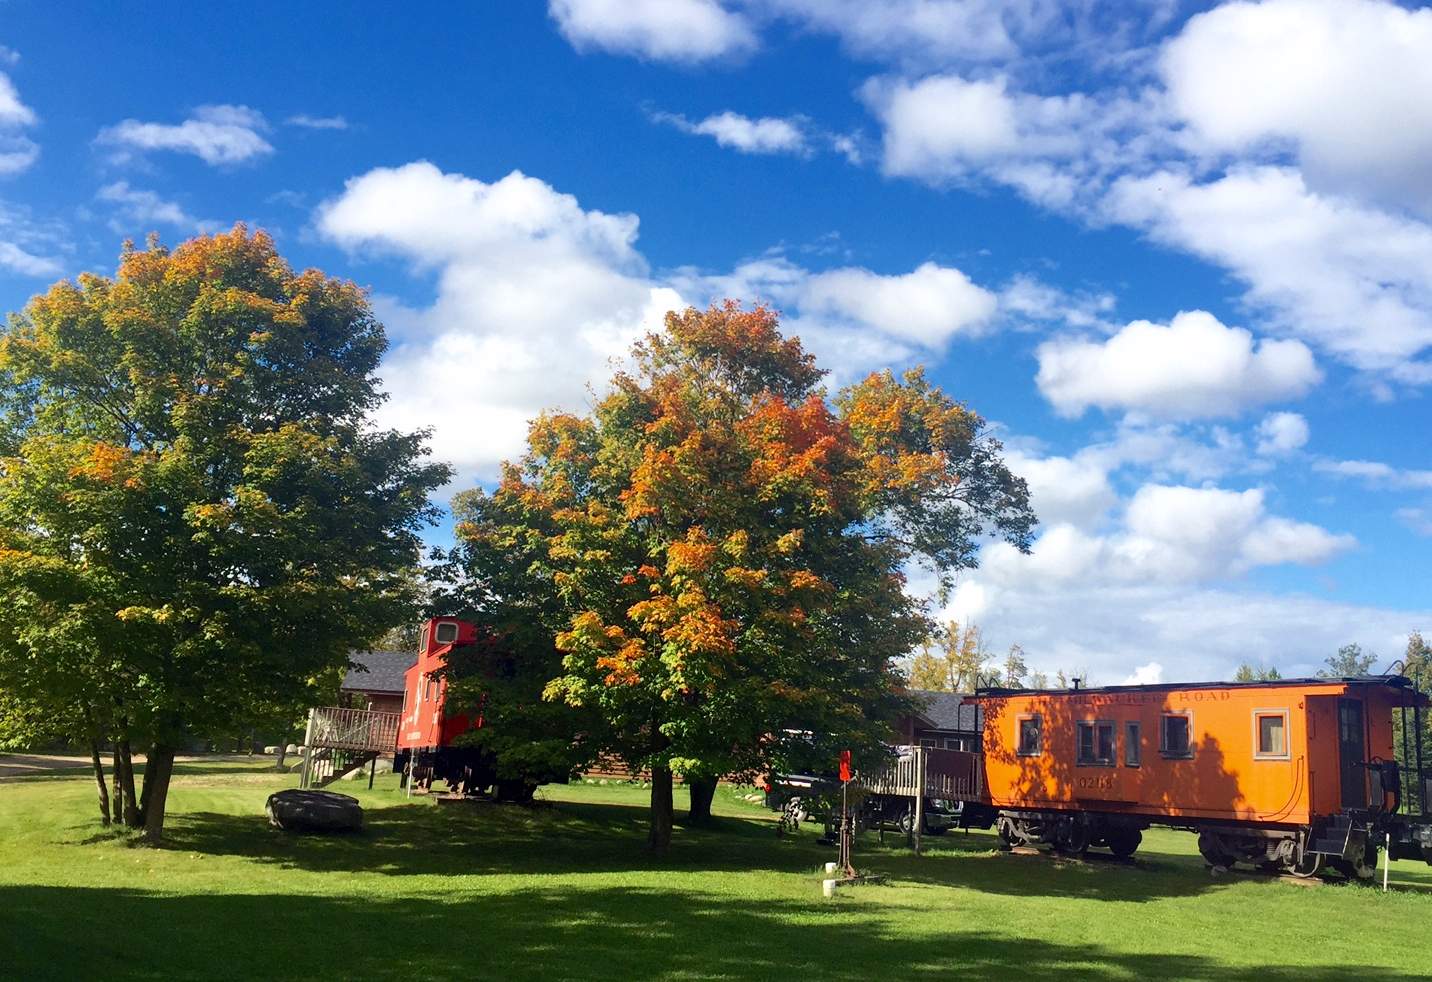 Maple trees near the caboose with early fall color. September 16th, 2016.